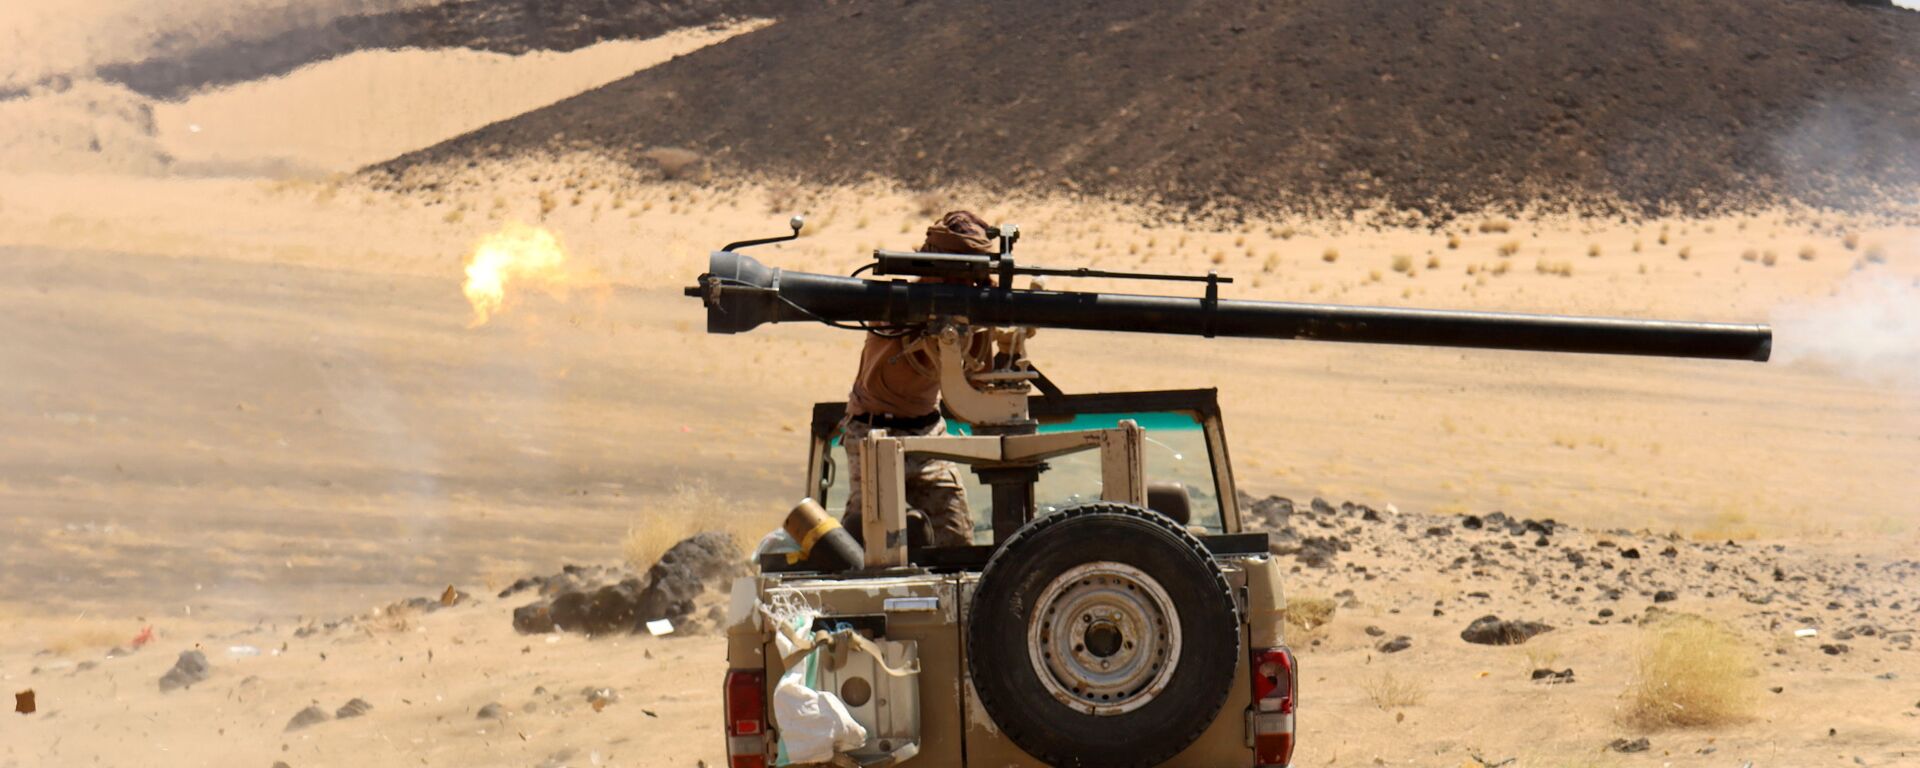 A Yemeni government fighter fires a vehicle-mounted weapon at a frontline position during fighting against Houthi fighters in Marib, Yemen March 9, 2021 - Sputnik International, 1920, 03.10.2021